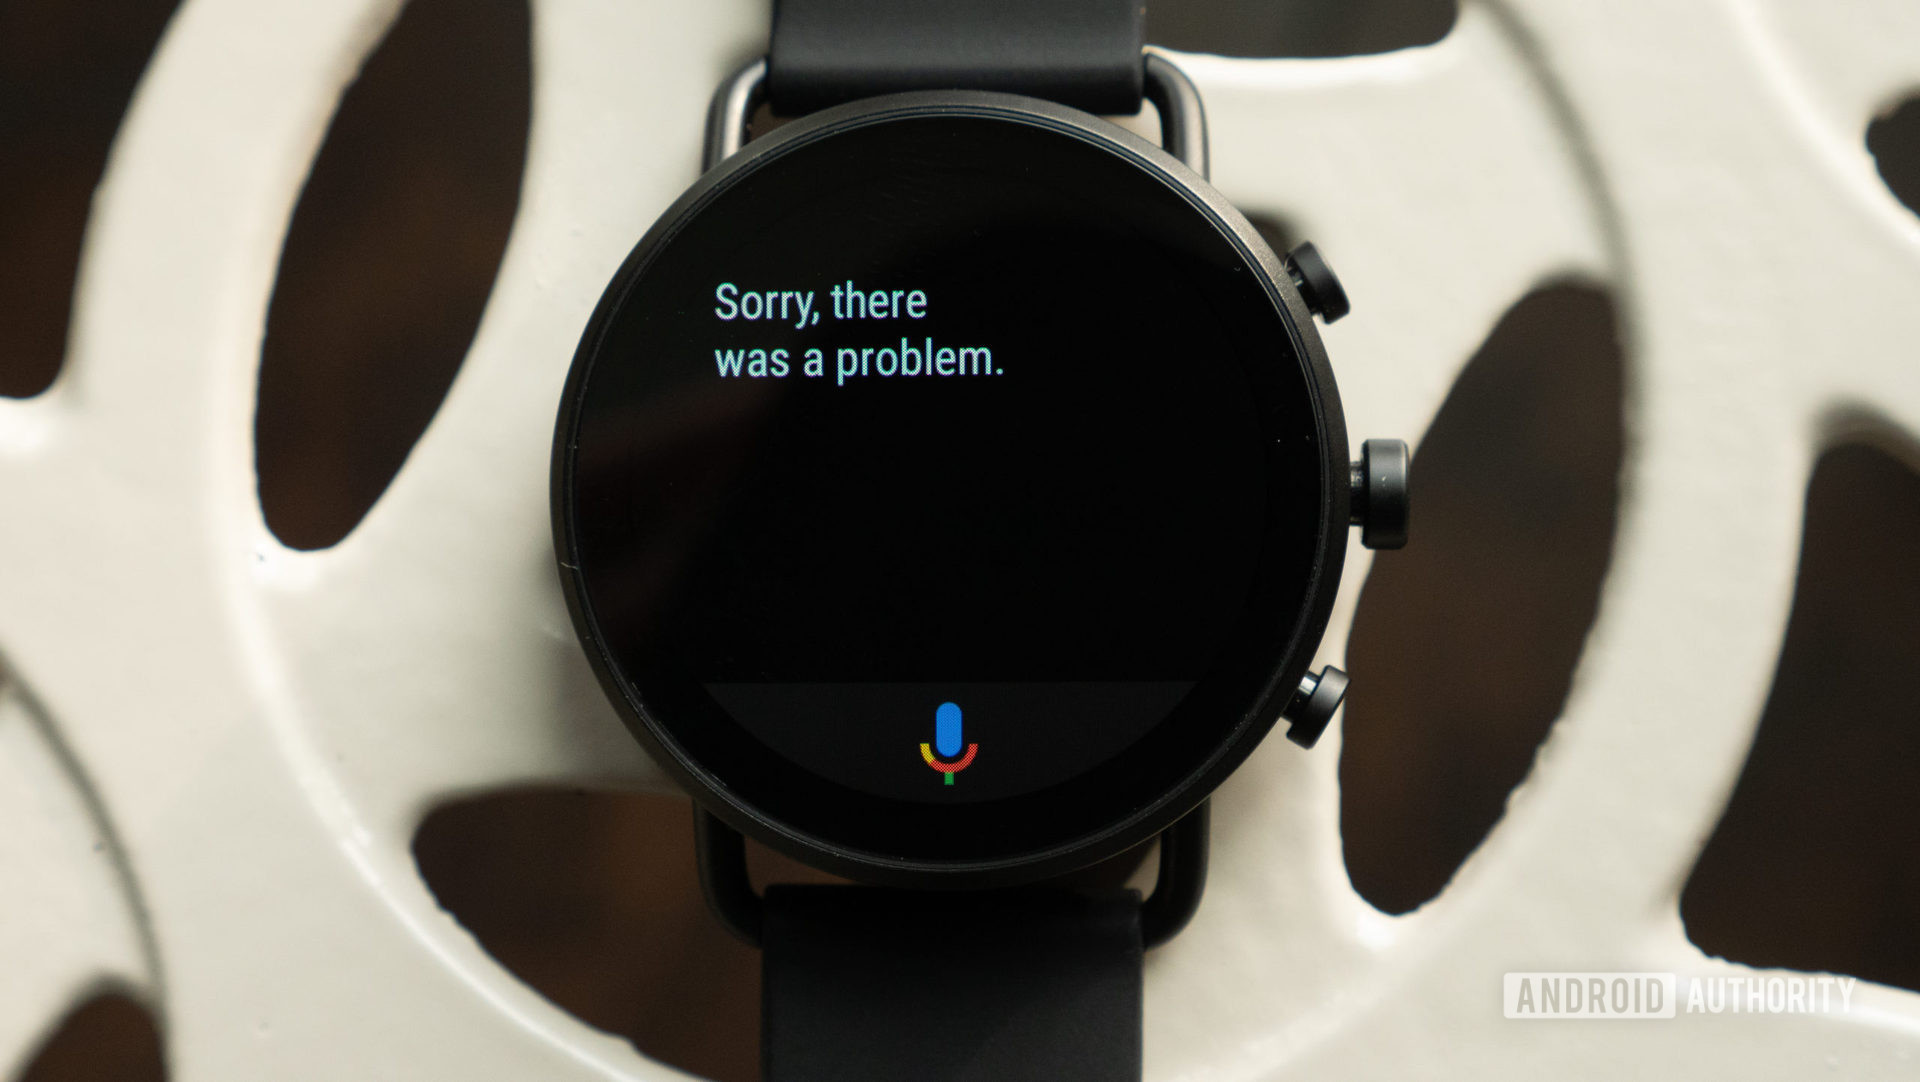 An image of the SKAGEN Falster Gen 6 on a table showing Google Assistant sorry there was a problem error message